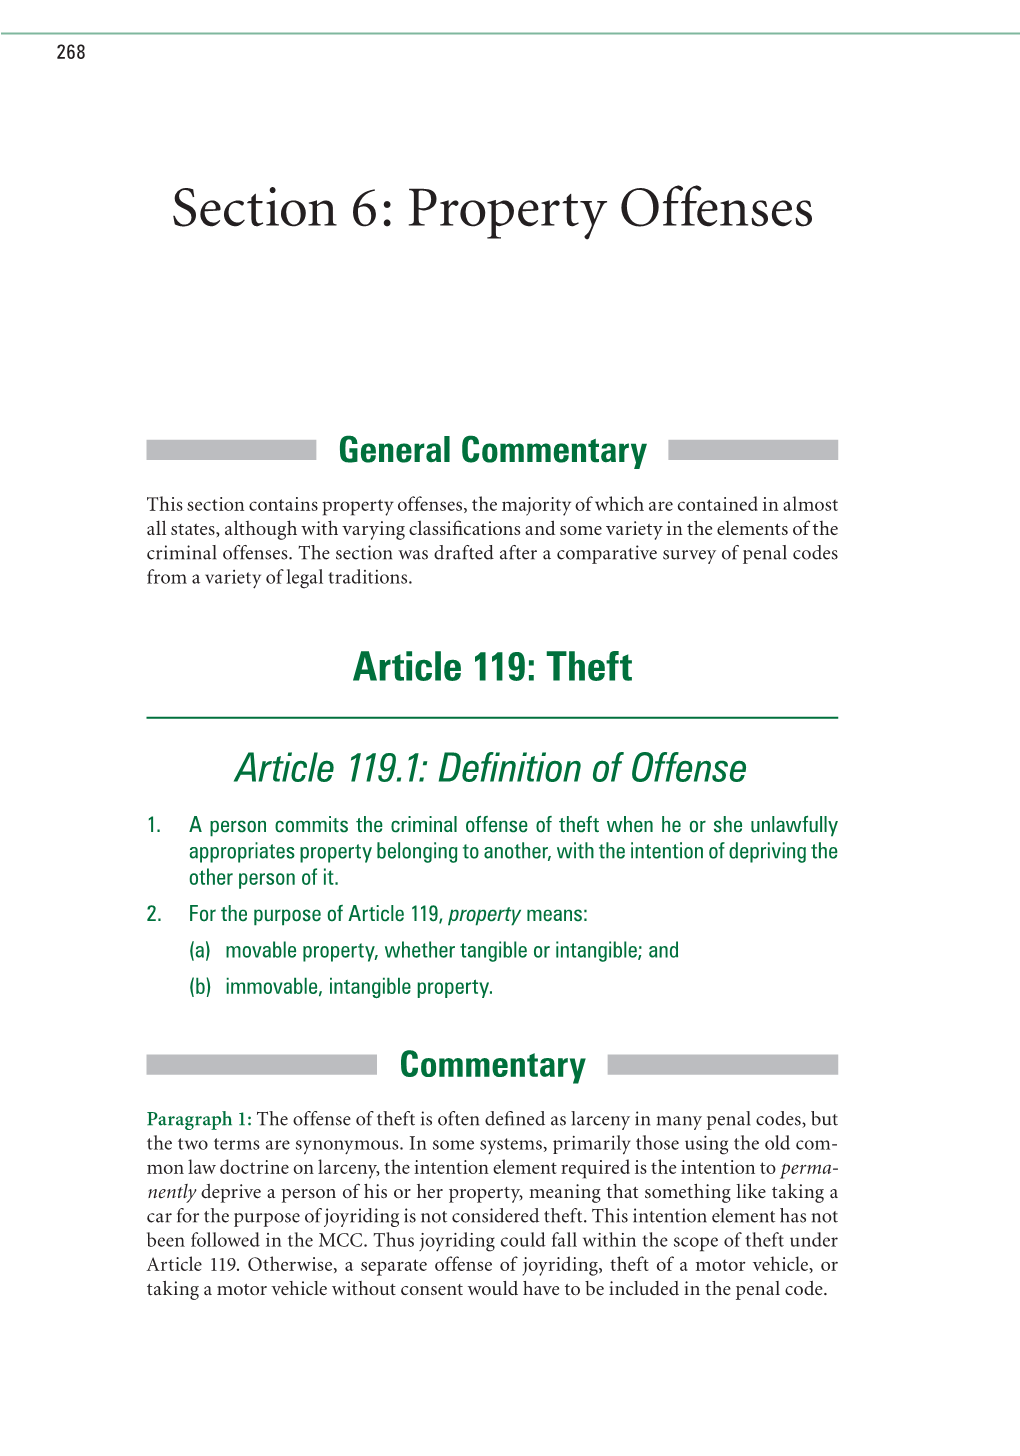 Section 6: Property Offenses